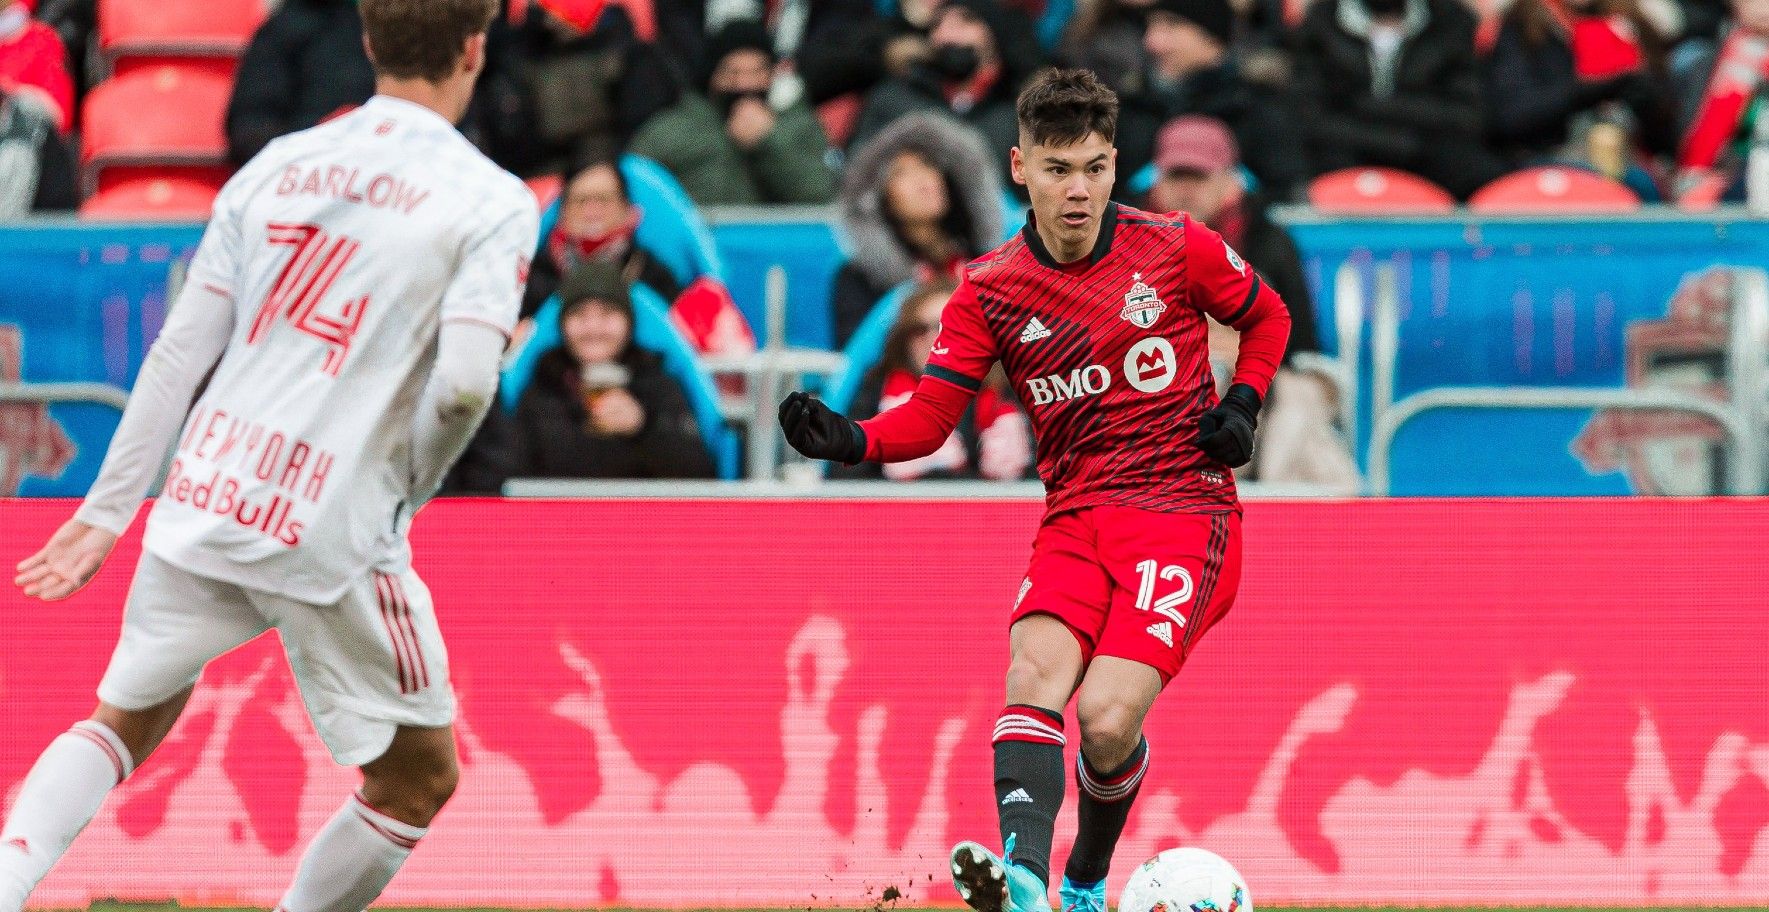 Toronto FC's Kadin Chung: 'Things aren't promised to you in this game'